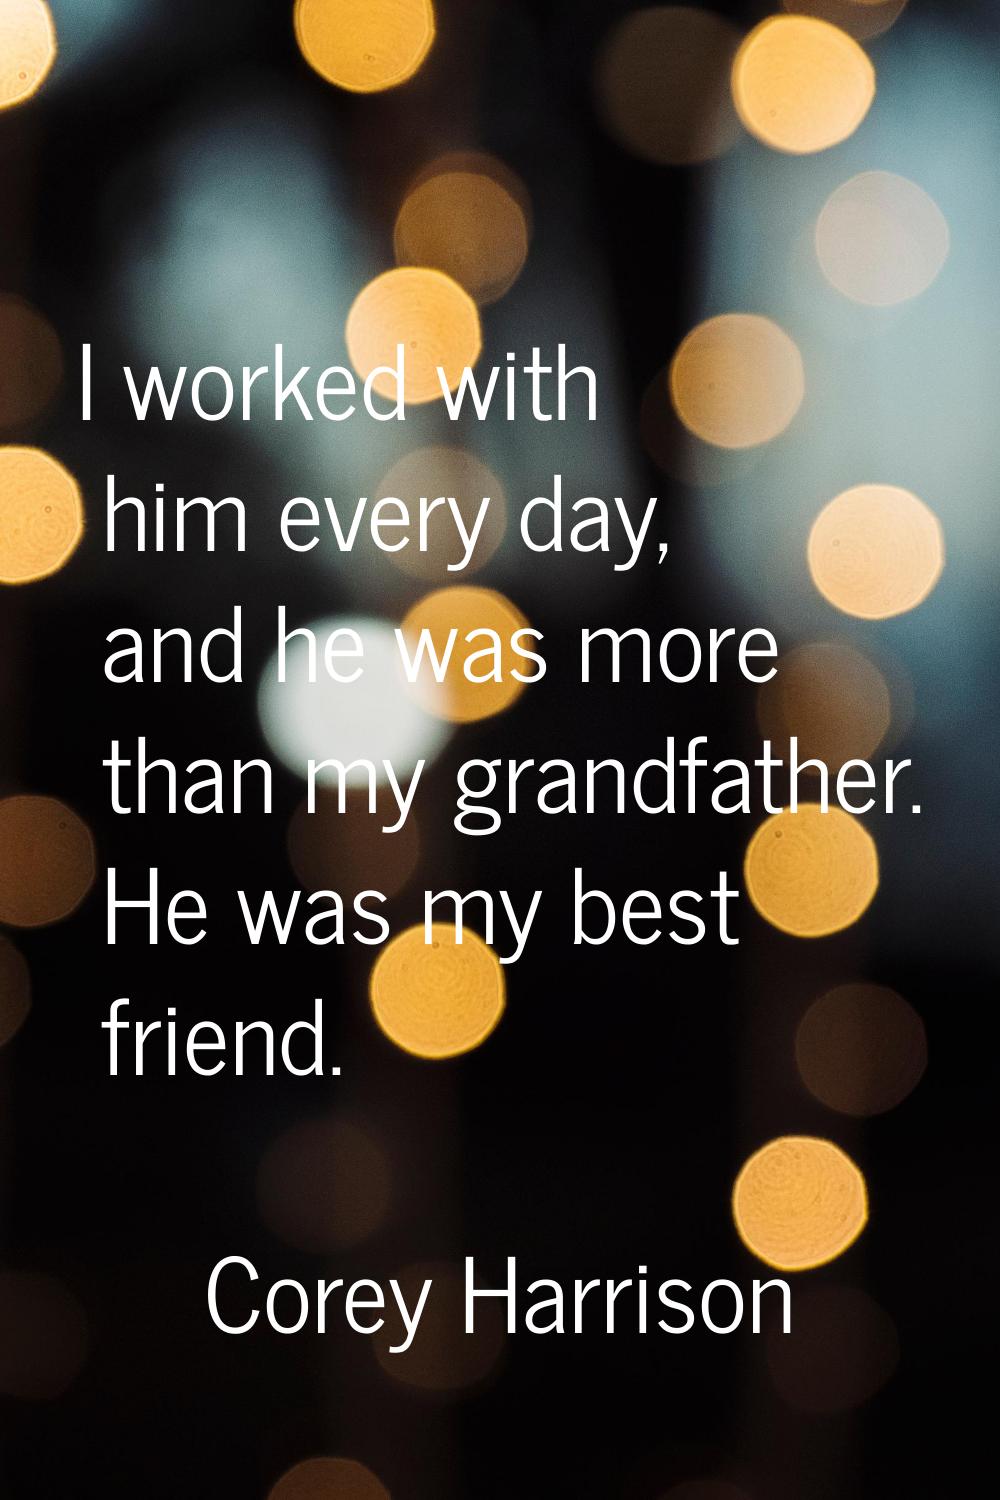 I worked with him every day, and he was more than my grandfather. He was my best friend.